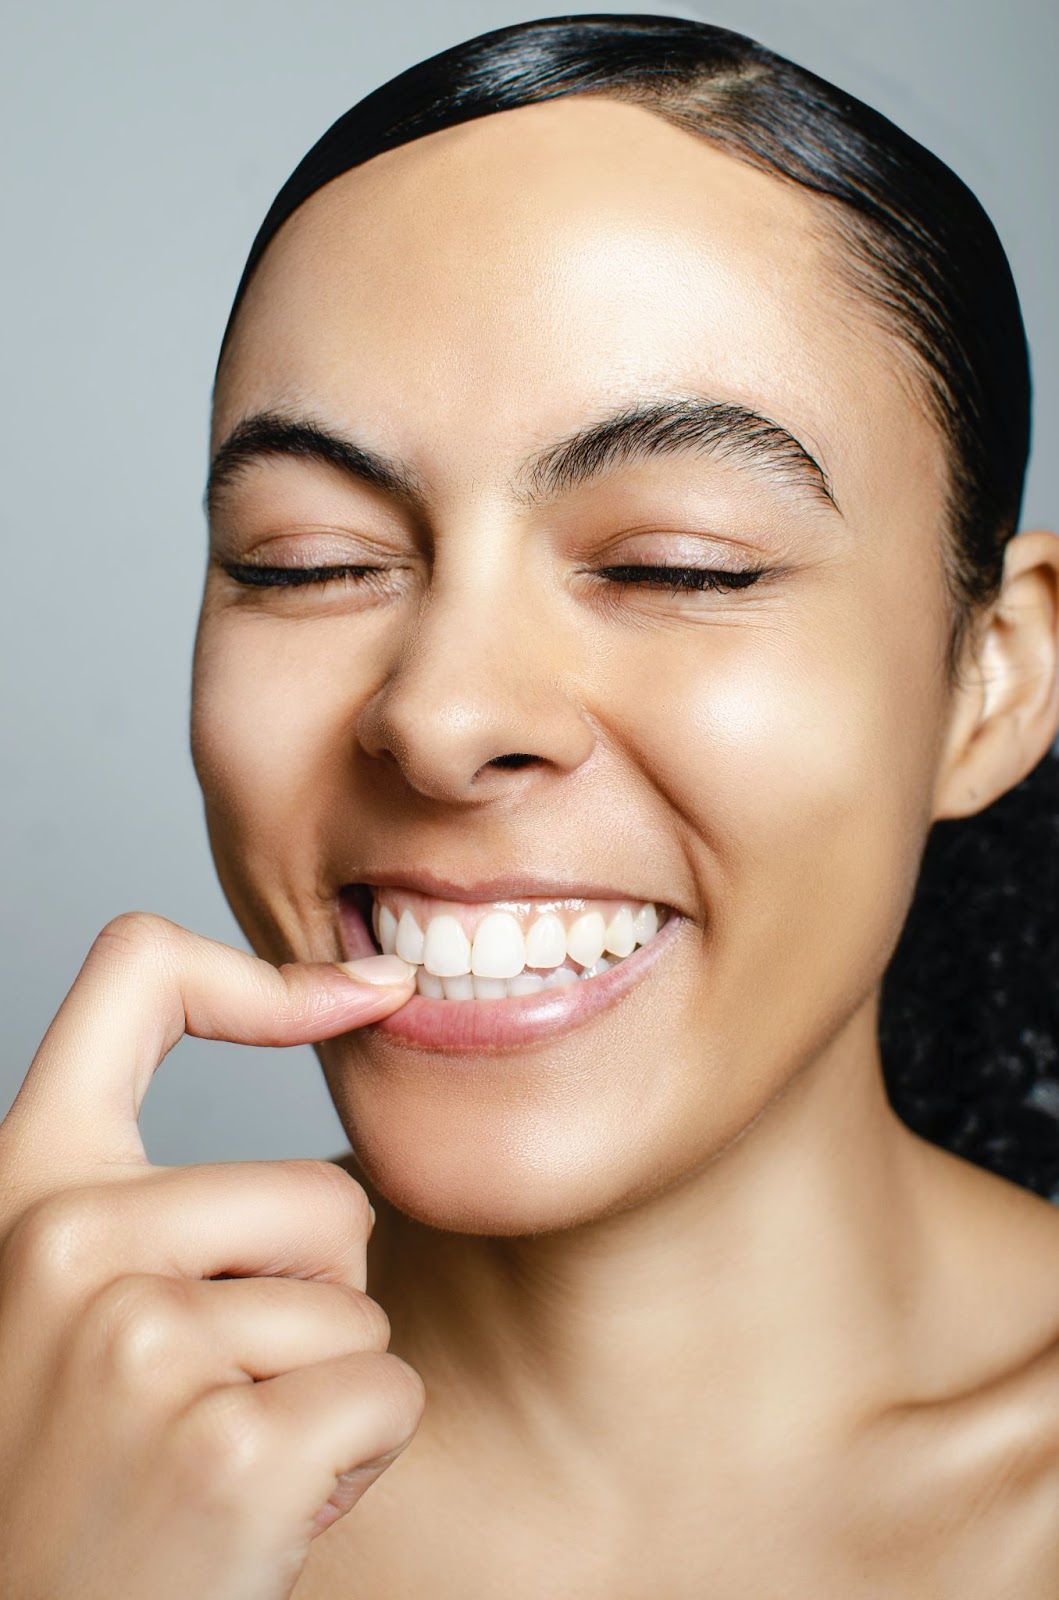 Top Three Cosmetic Dental Treatments for Better Oral Health